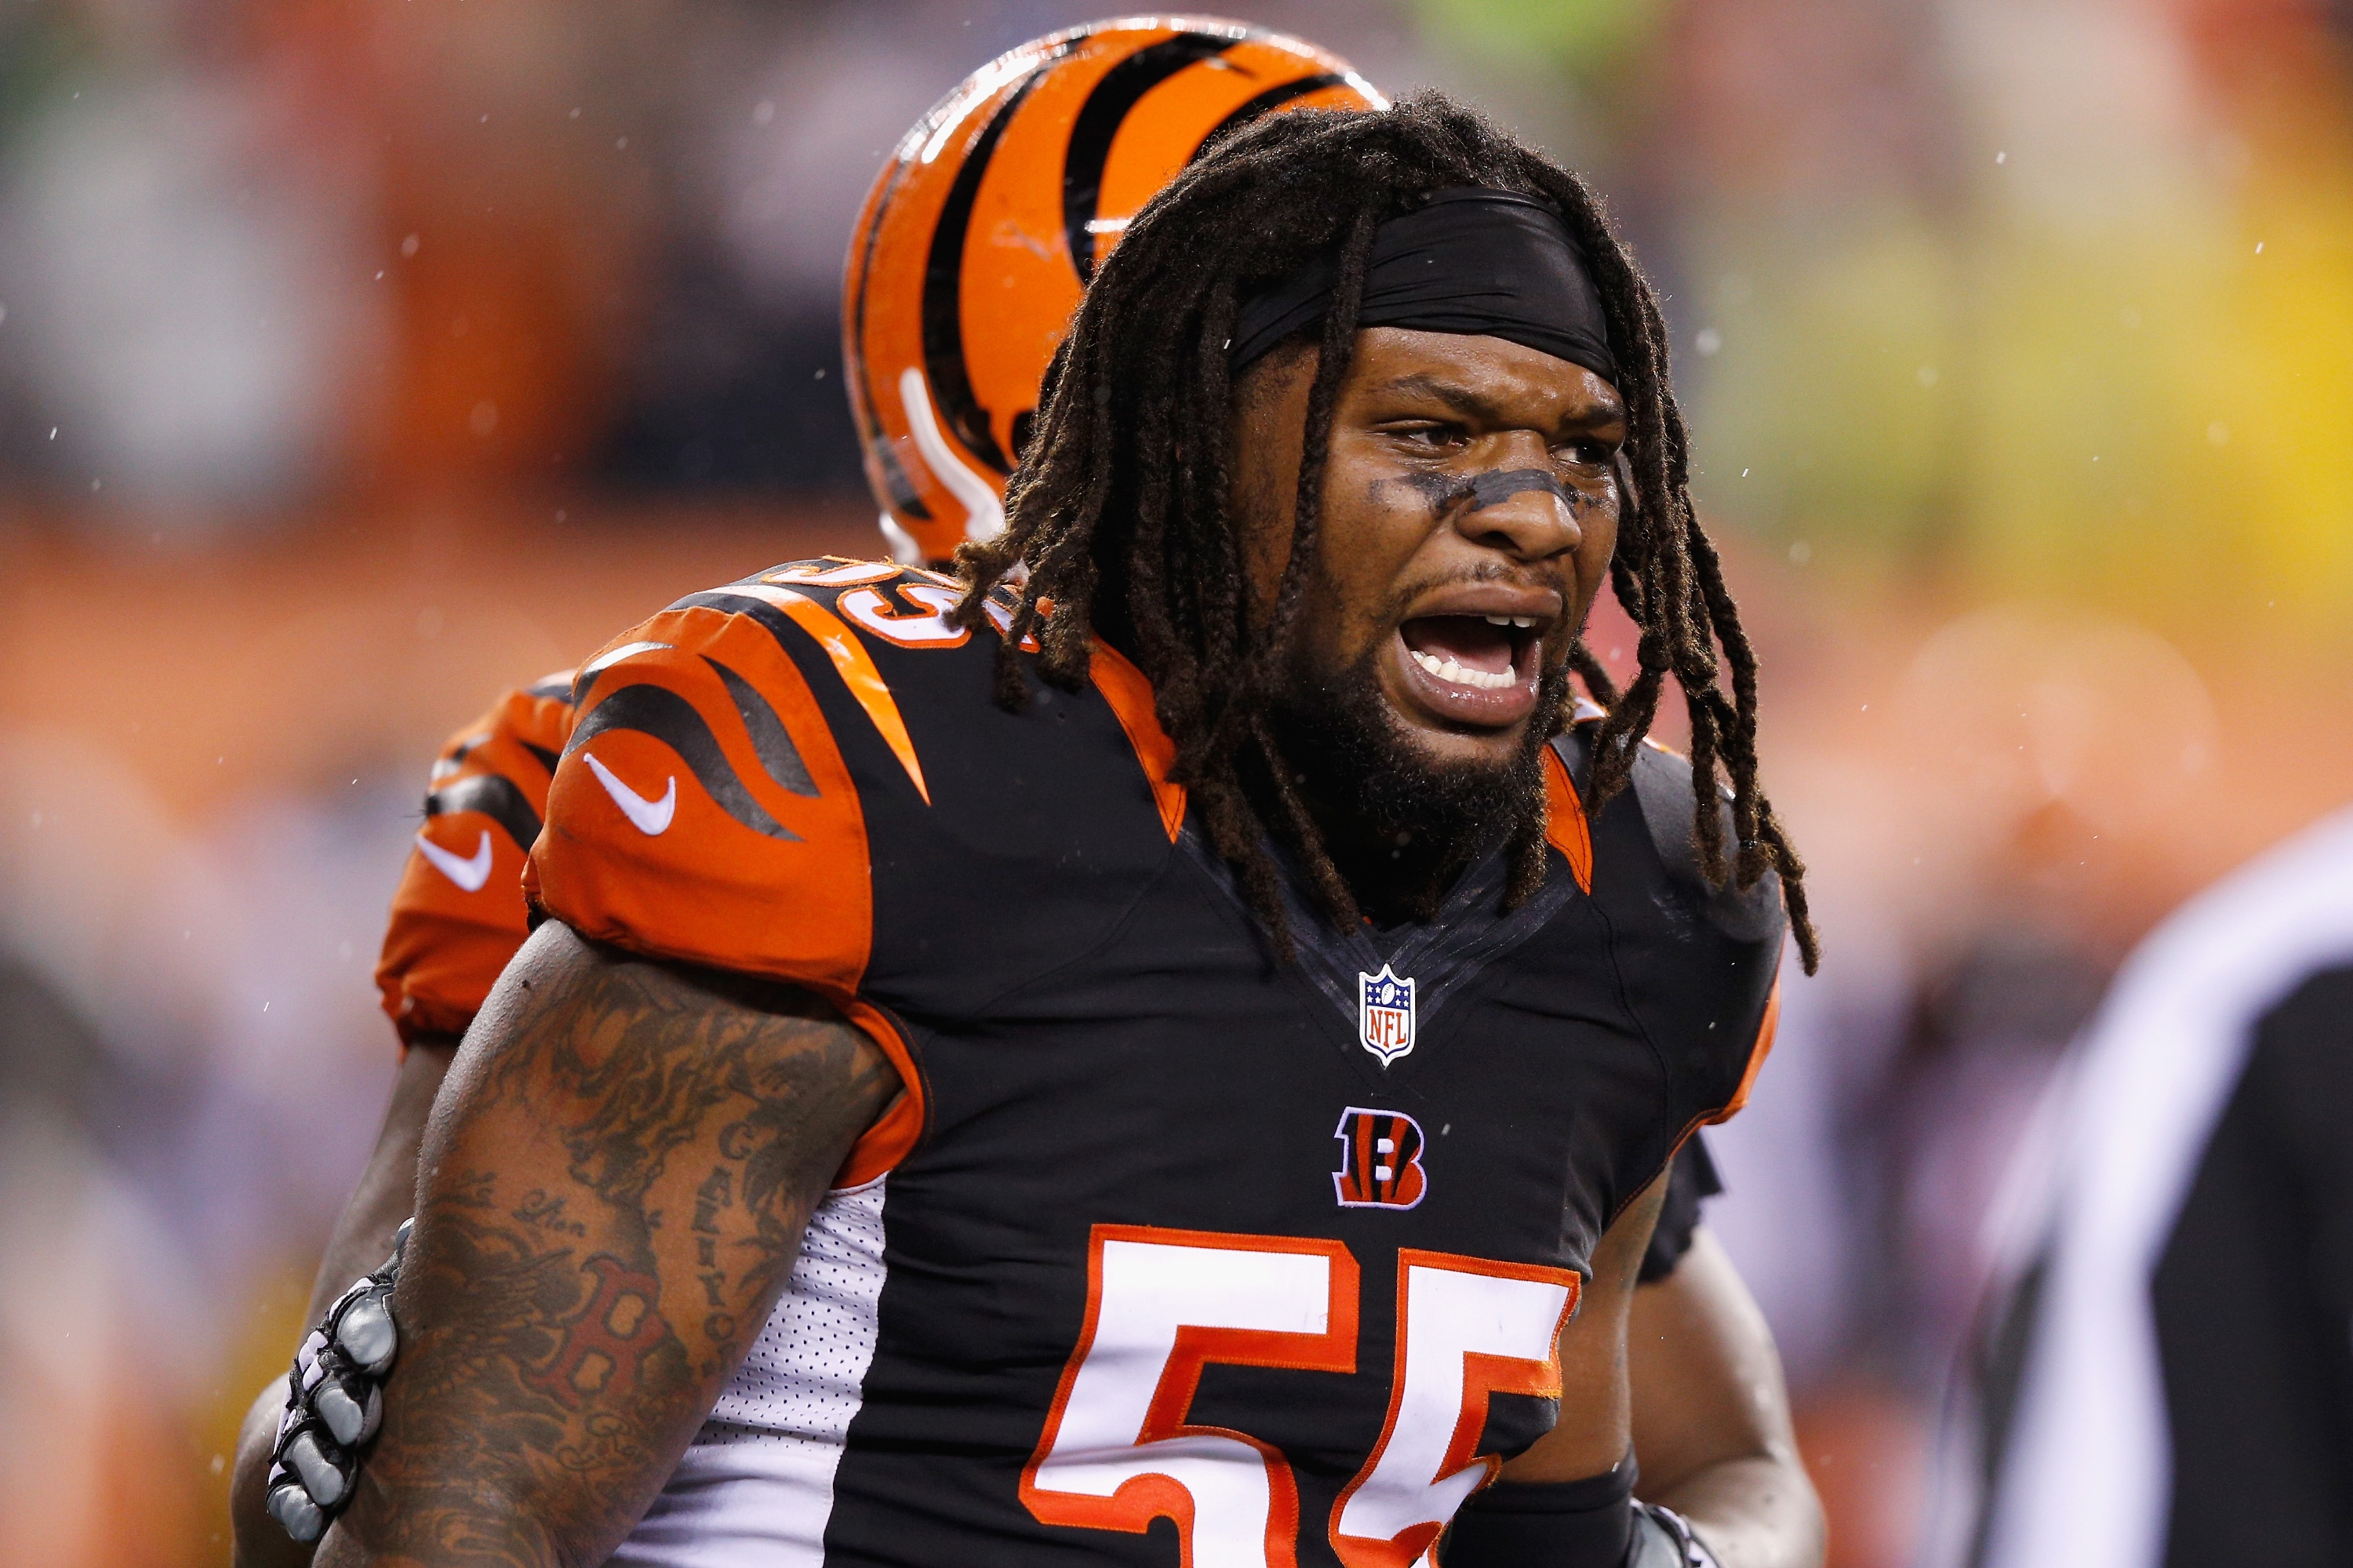 CINCINNATI, OH - JANUARY 09:  Vontaze Burfict #55 of the Cincinnati Bengals reacts in the third quarter against the Pittsburgh Steelers during the AFC Wild Card Playoff game at Paul Brown Stadium on January 9, 2016 in Cincinnati, Ohio.  (Photo by Joe Robbins/Getty Images)